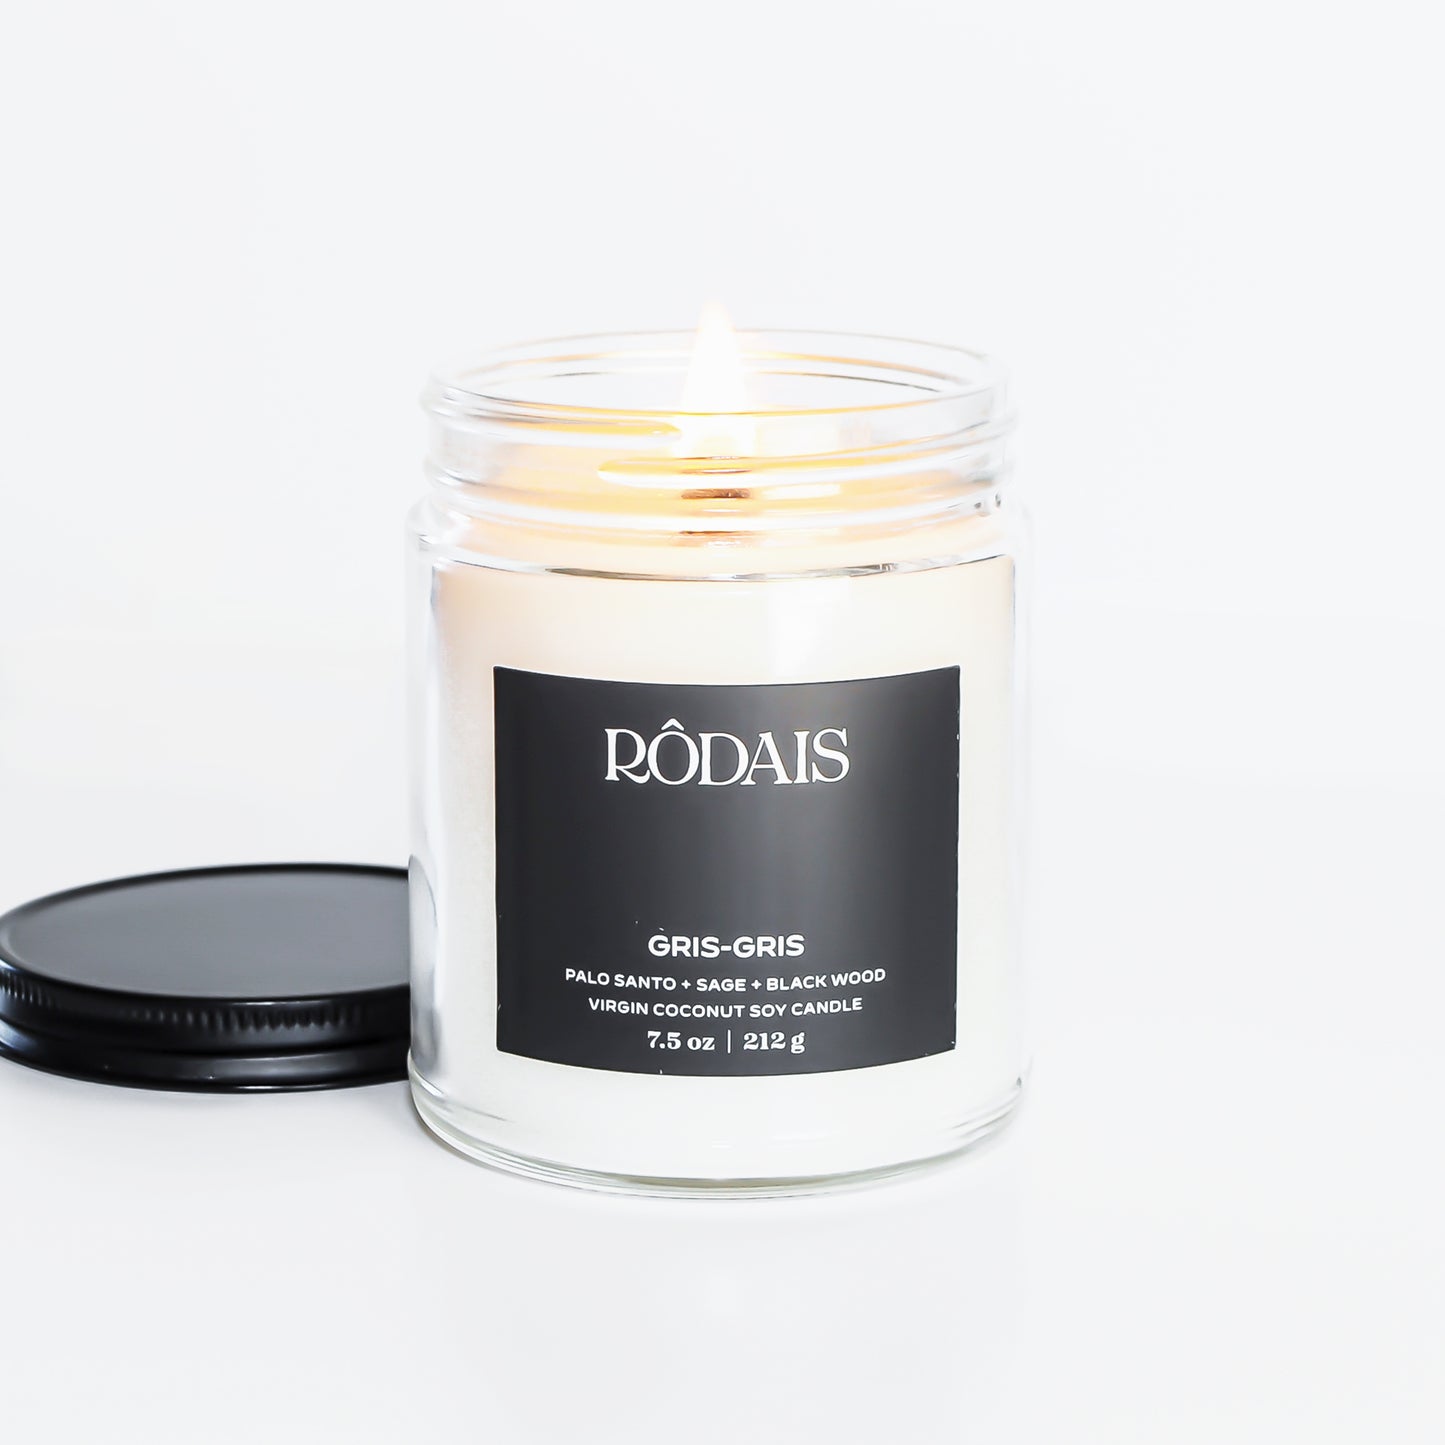 Gris-Gris: Wooden Wick + Virgin Coco Soy Candle